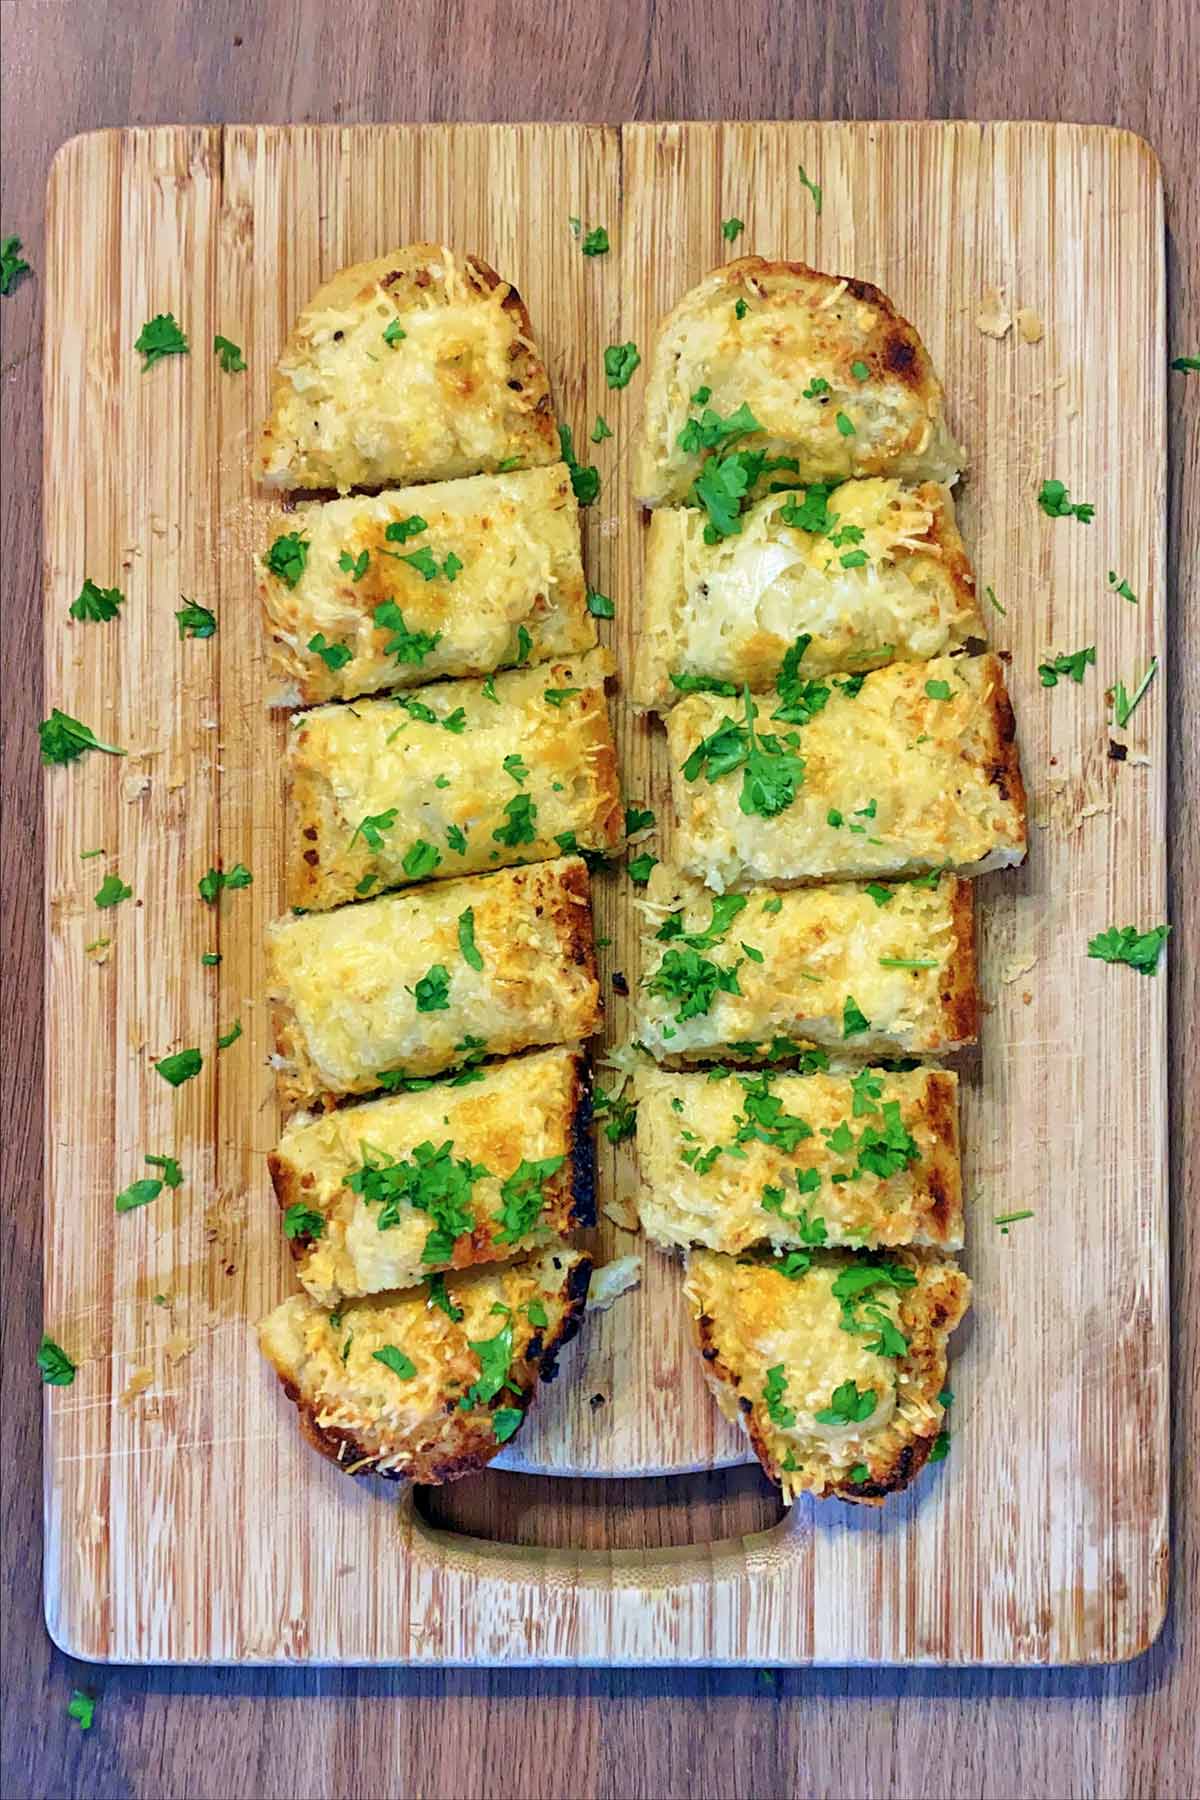 The garlic bread cut into slices with chopped parsley sprinkled over.